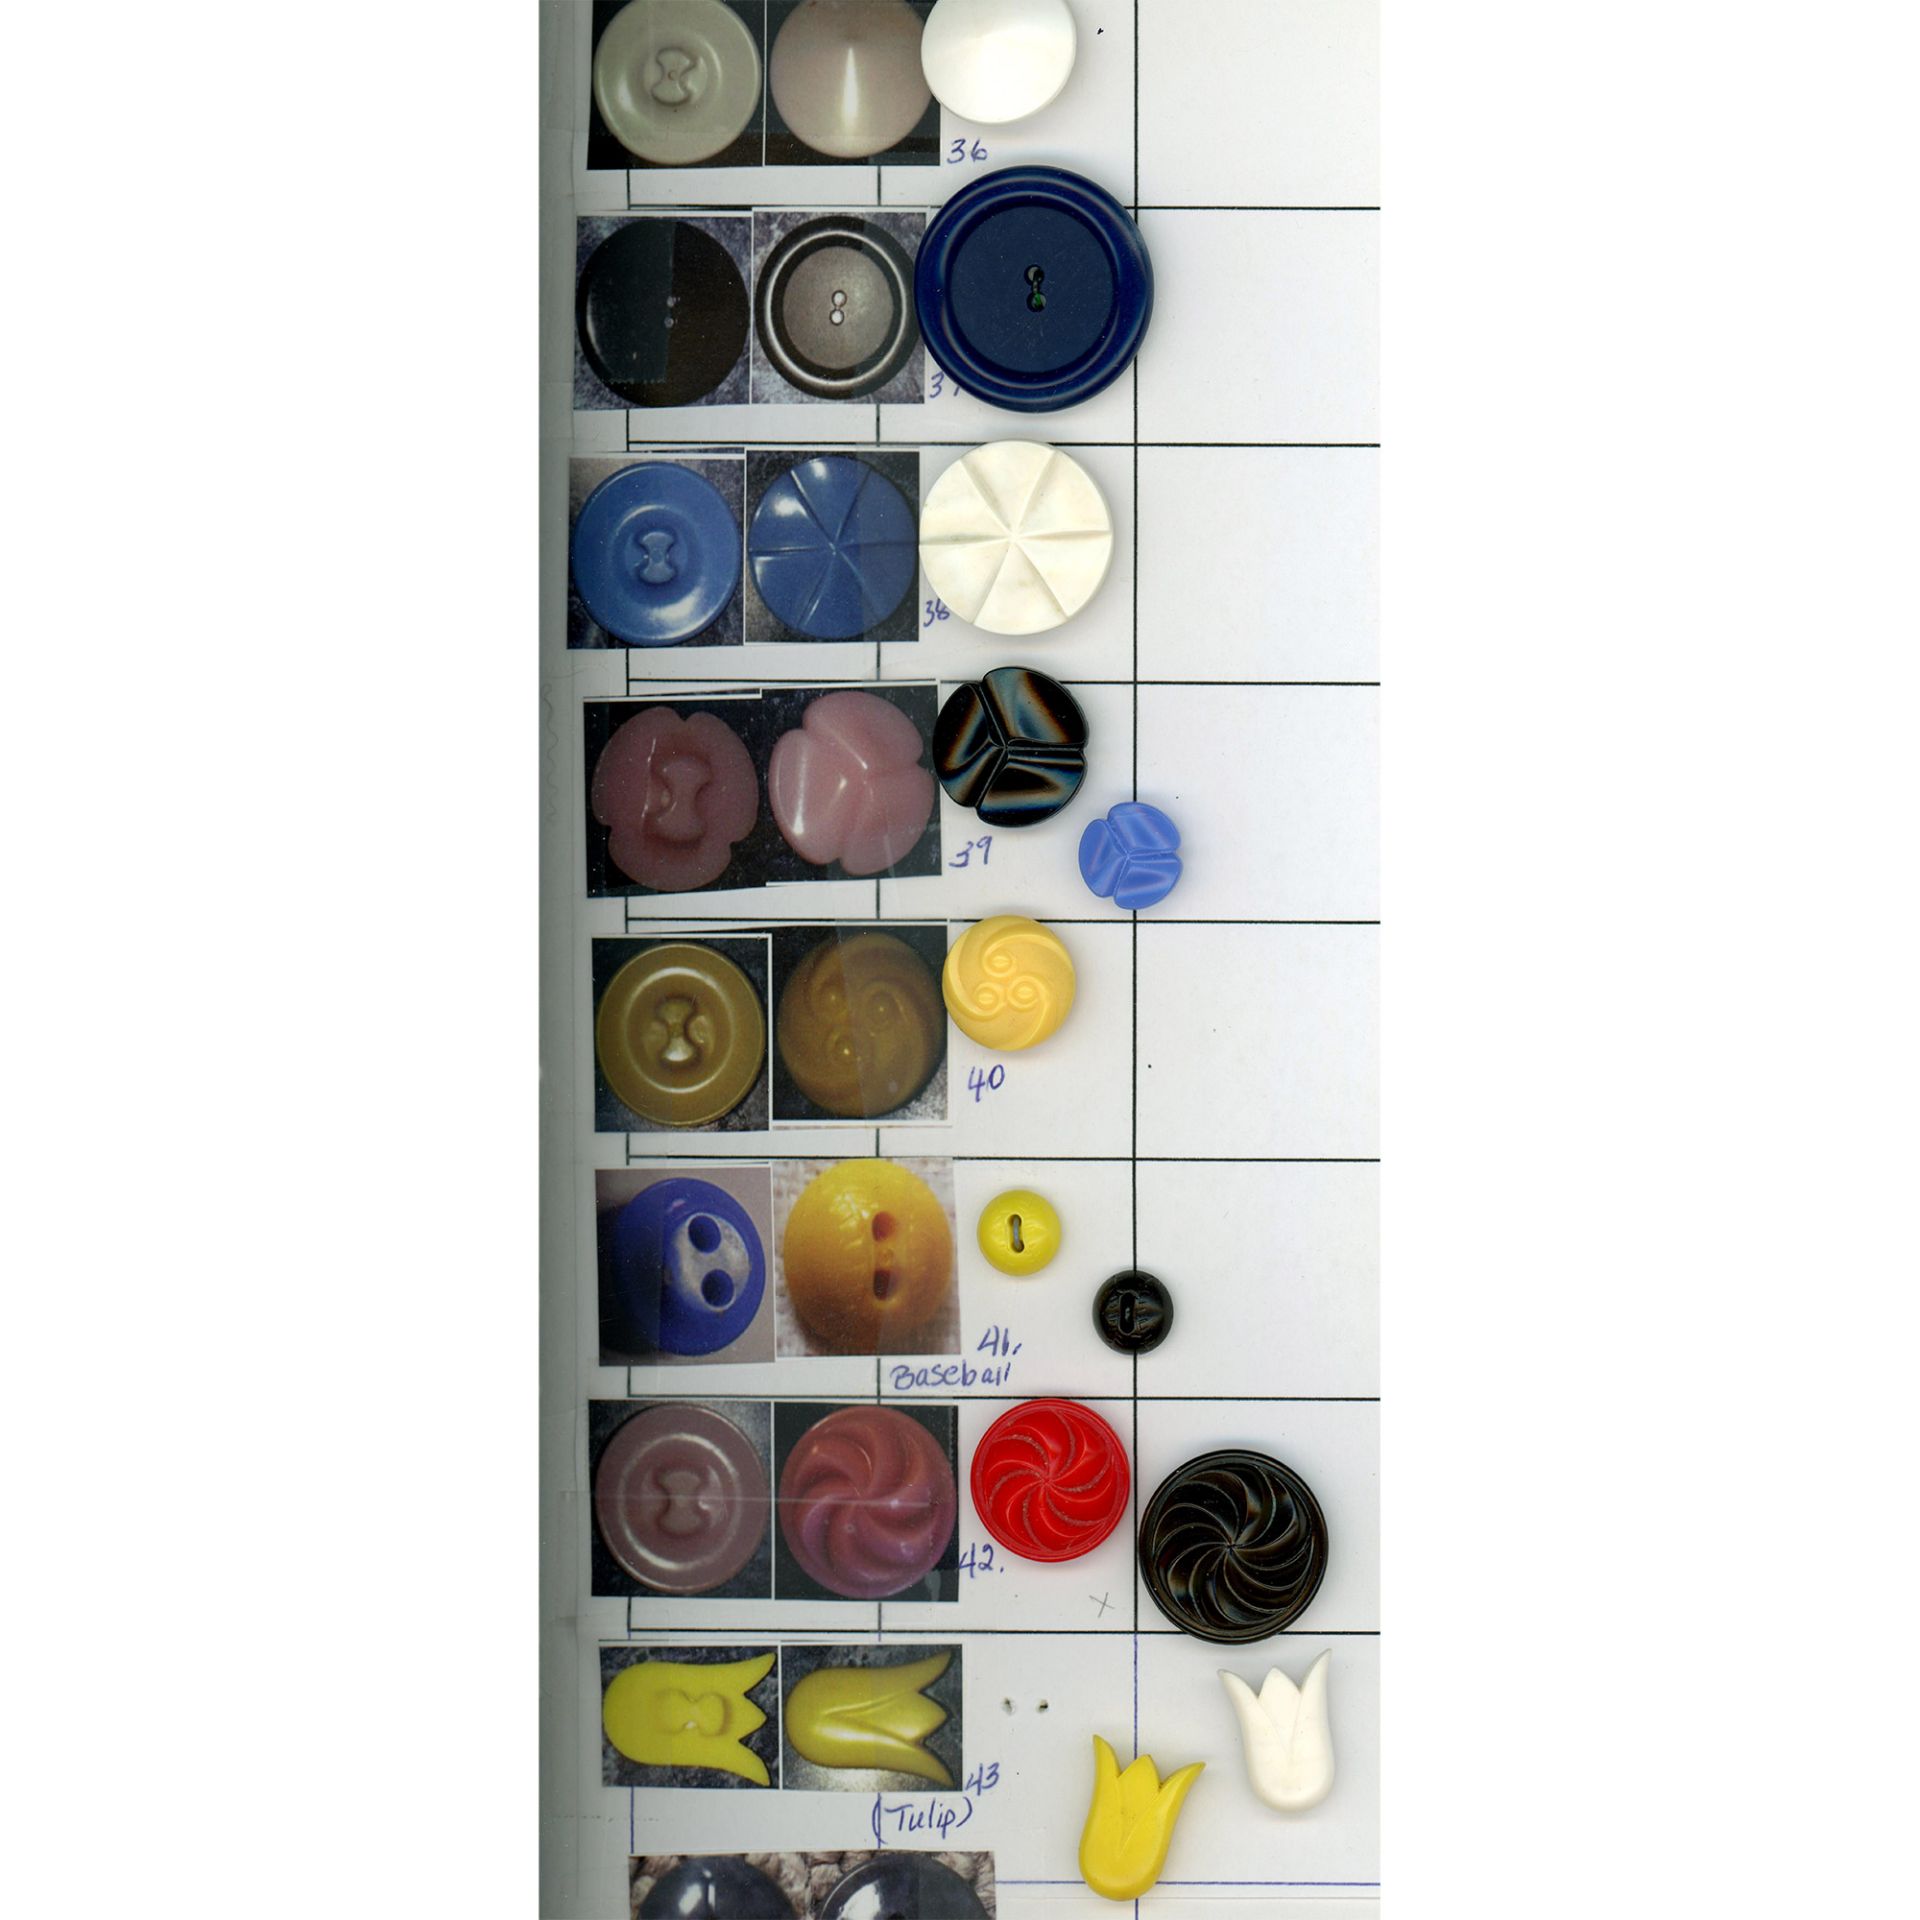 10 Cards of Division Three Colorful Plastic Buttons - Image 8 of 10